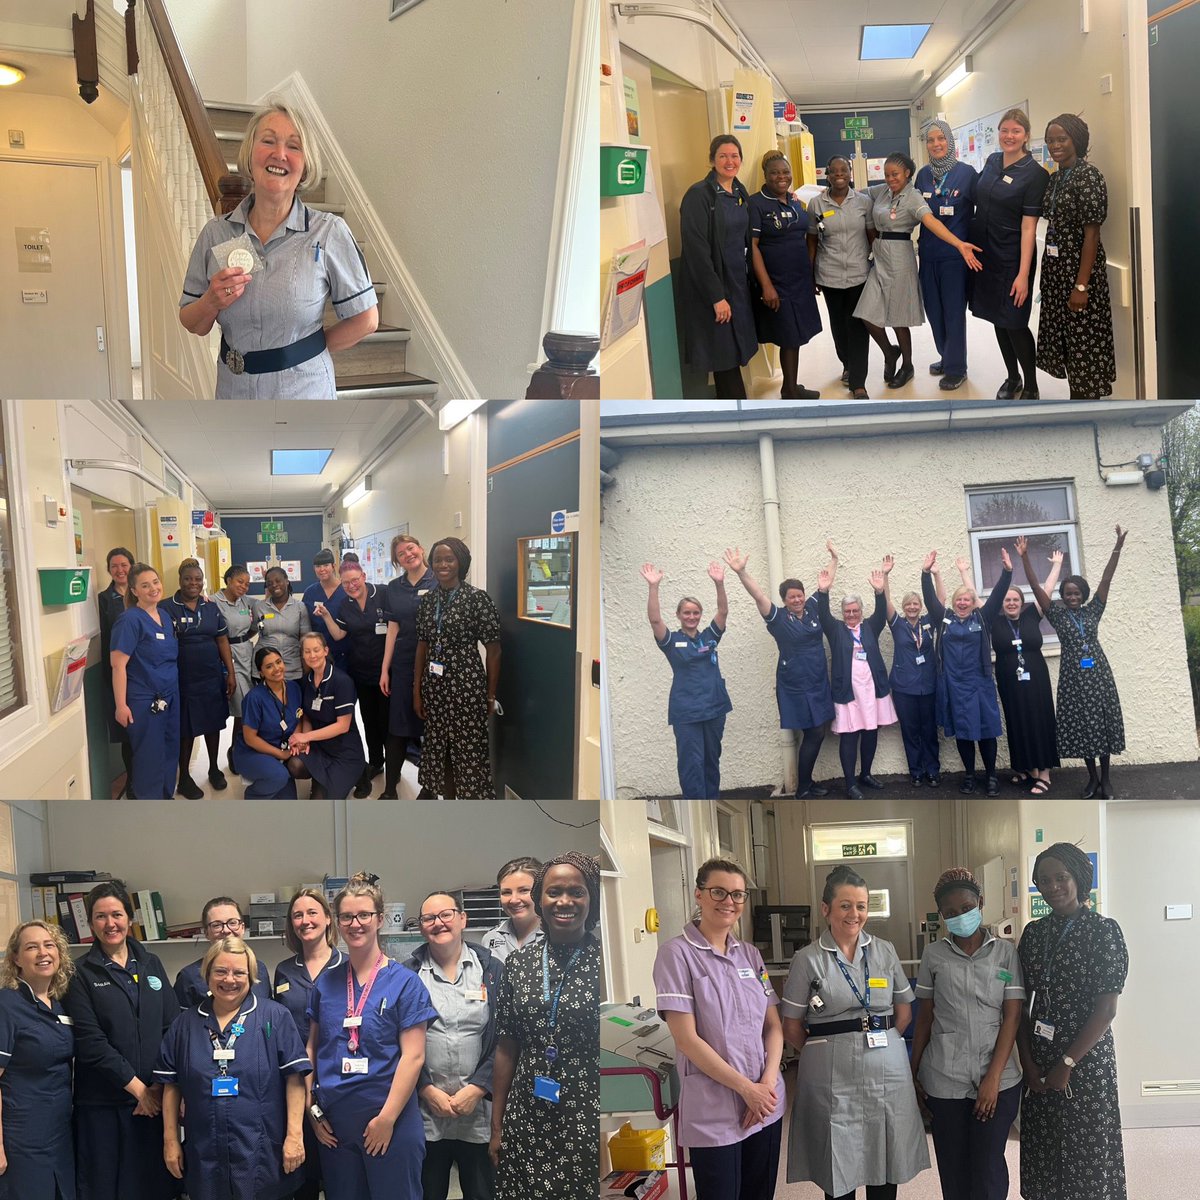 My first #international_midwives_day spent @NGHnhstrust. A huge thank you to our amazing midwives for everything they do for our parents, babies and one another. @IleneMachiva @ClareFlower2 @SarahCoiffait @emlambert8 @HeidiSmoult @debshan65 @EmmaPerkin2 @TeamCMidO